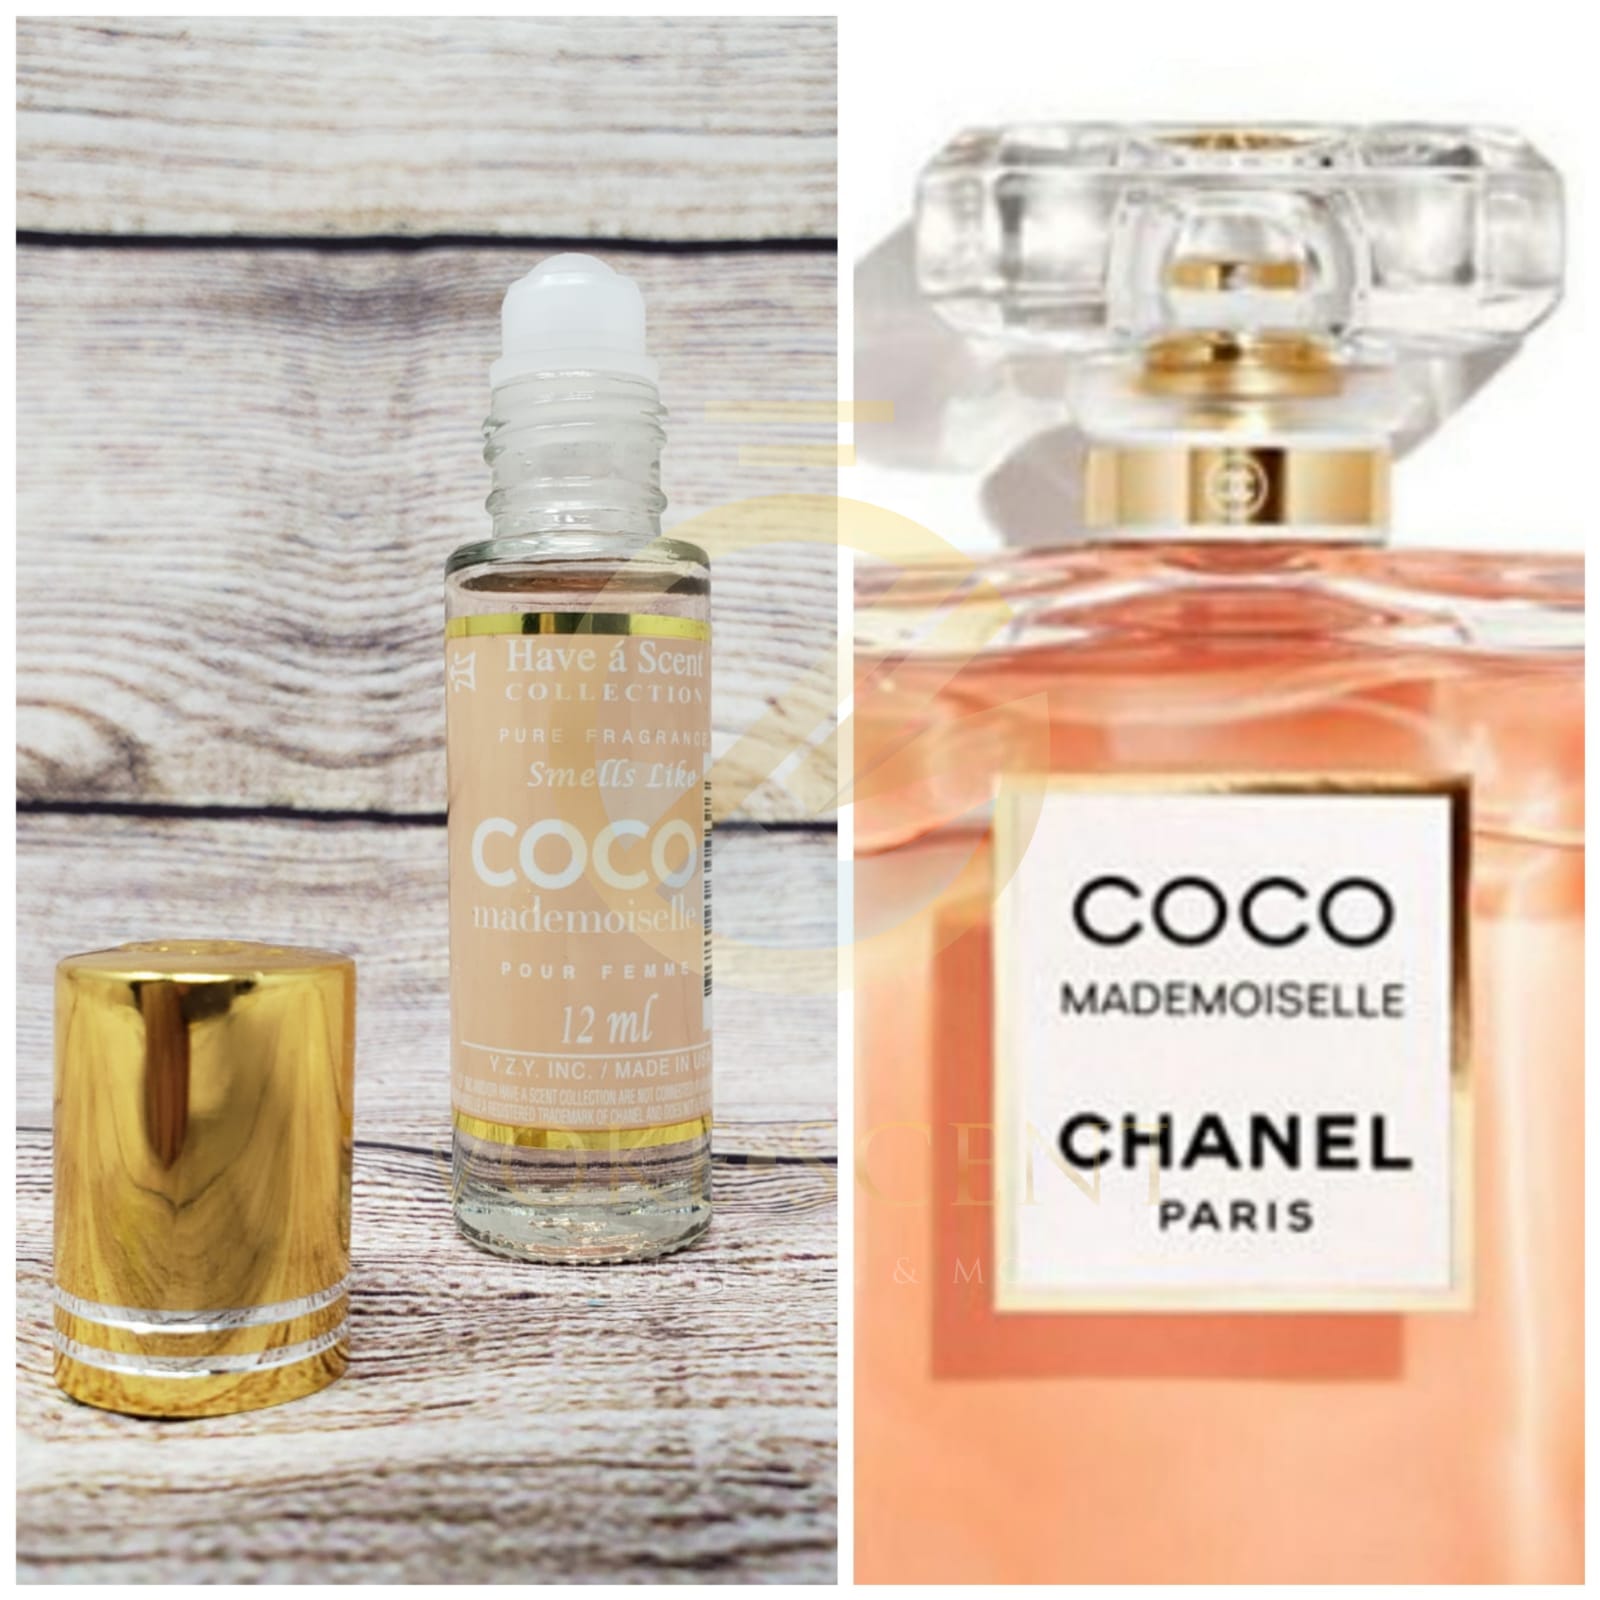 Chanel Coco Mademoiselle Silky Body Oil & EDP Intense Story Time